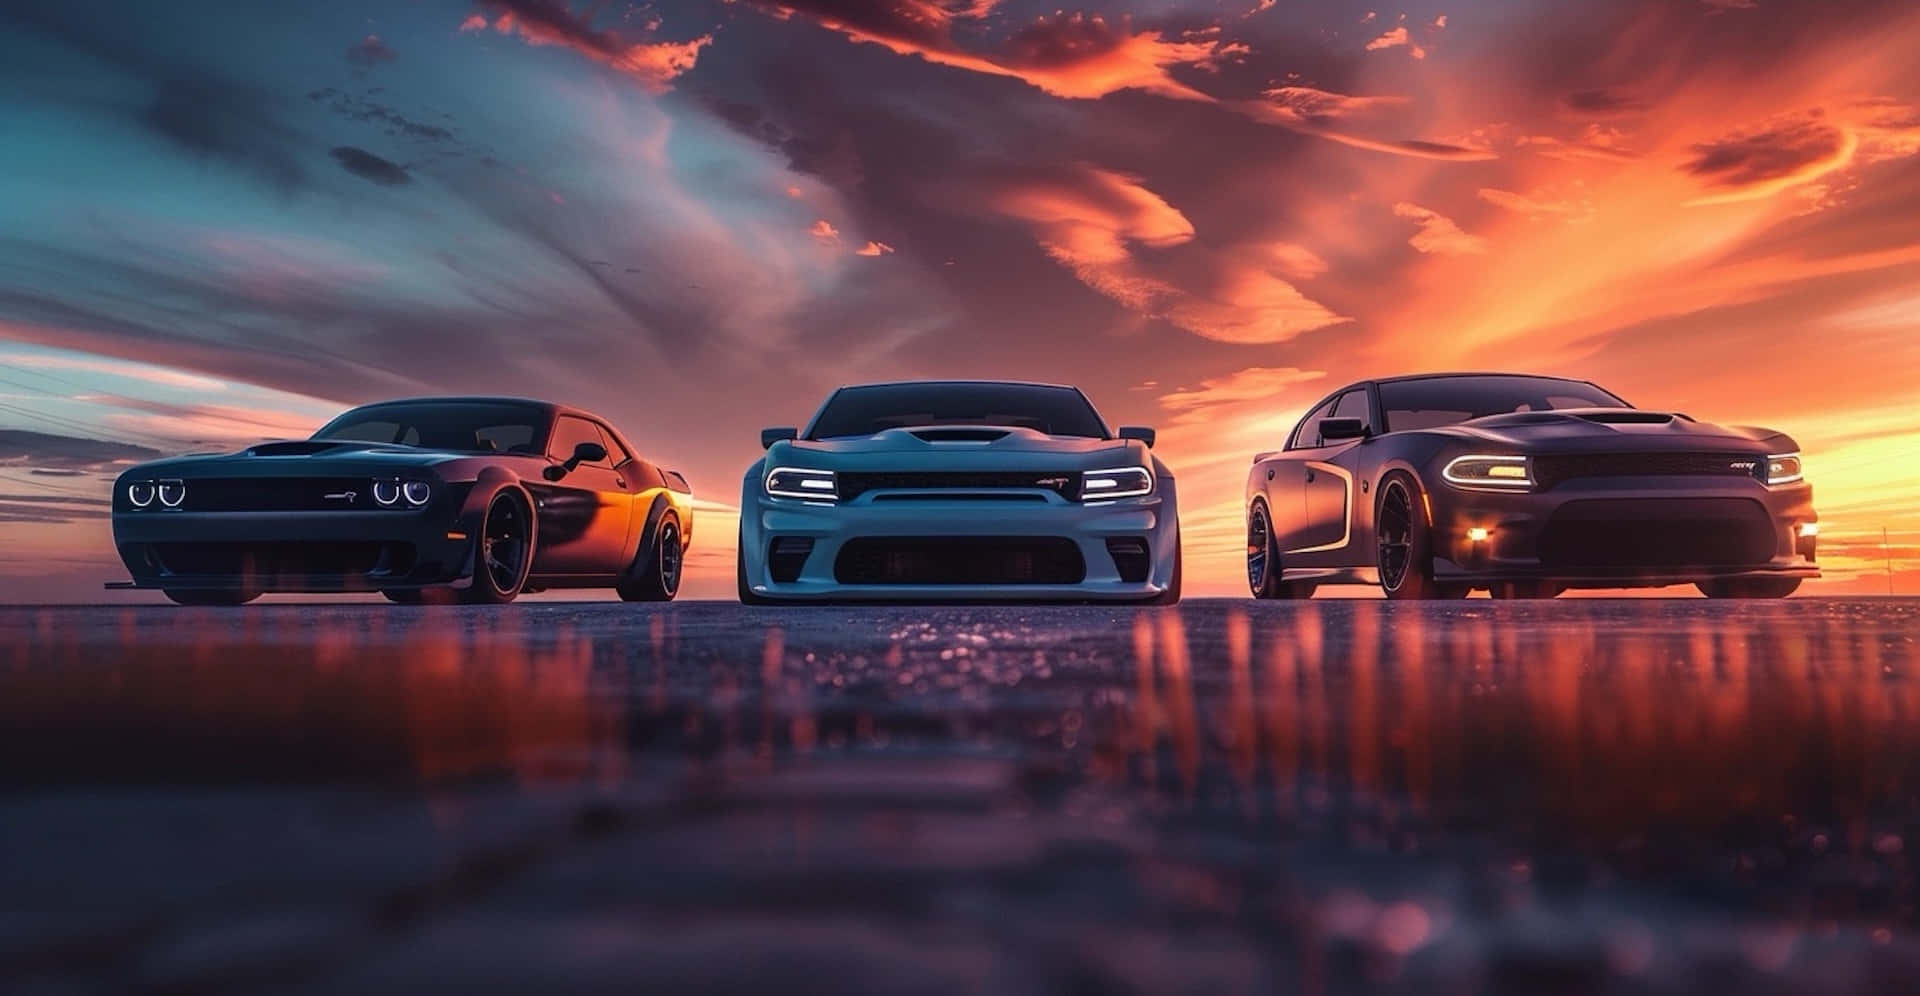 Dodge Charger Hellcat Trio Sunset Silhouette Wallpaper